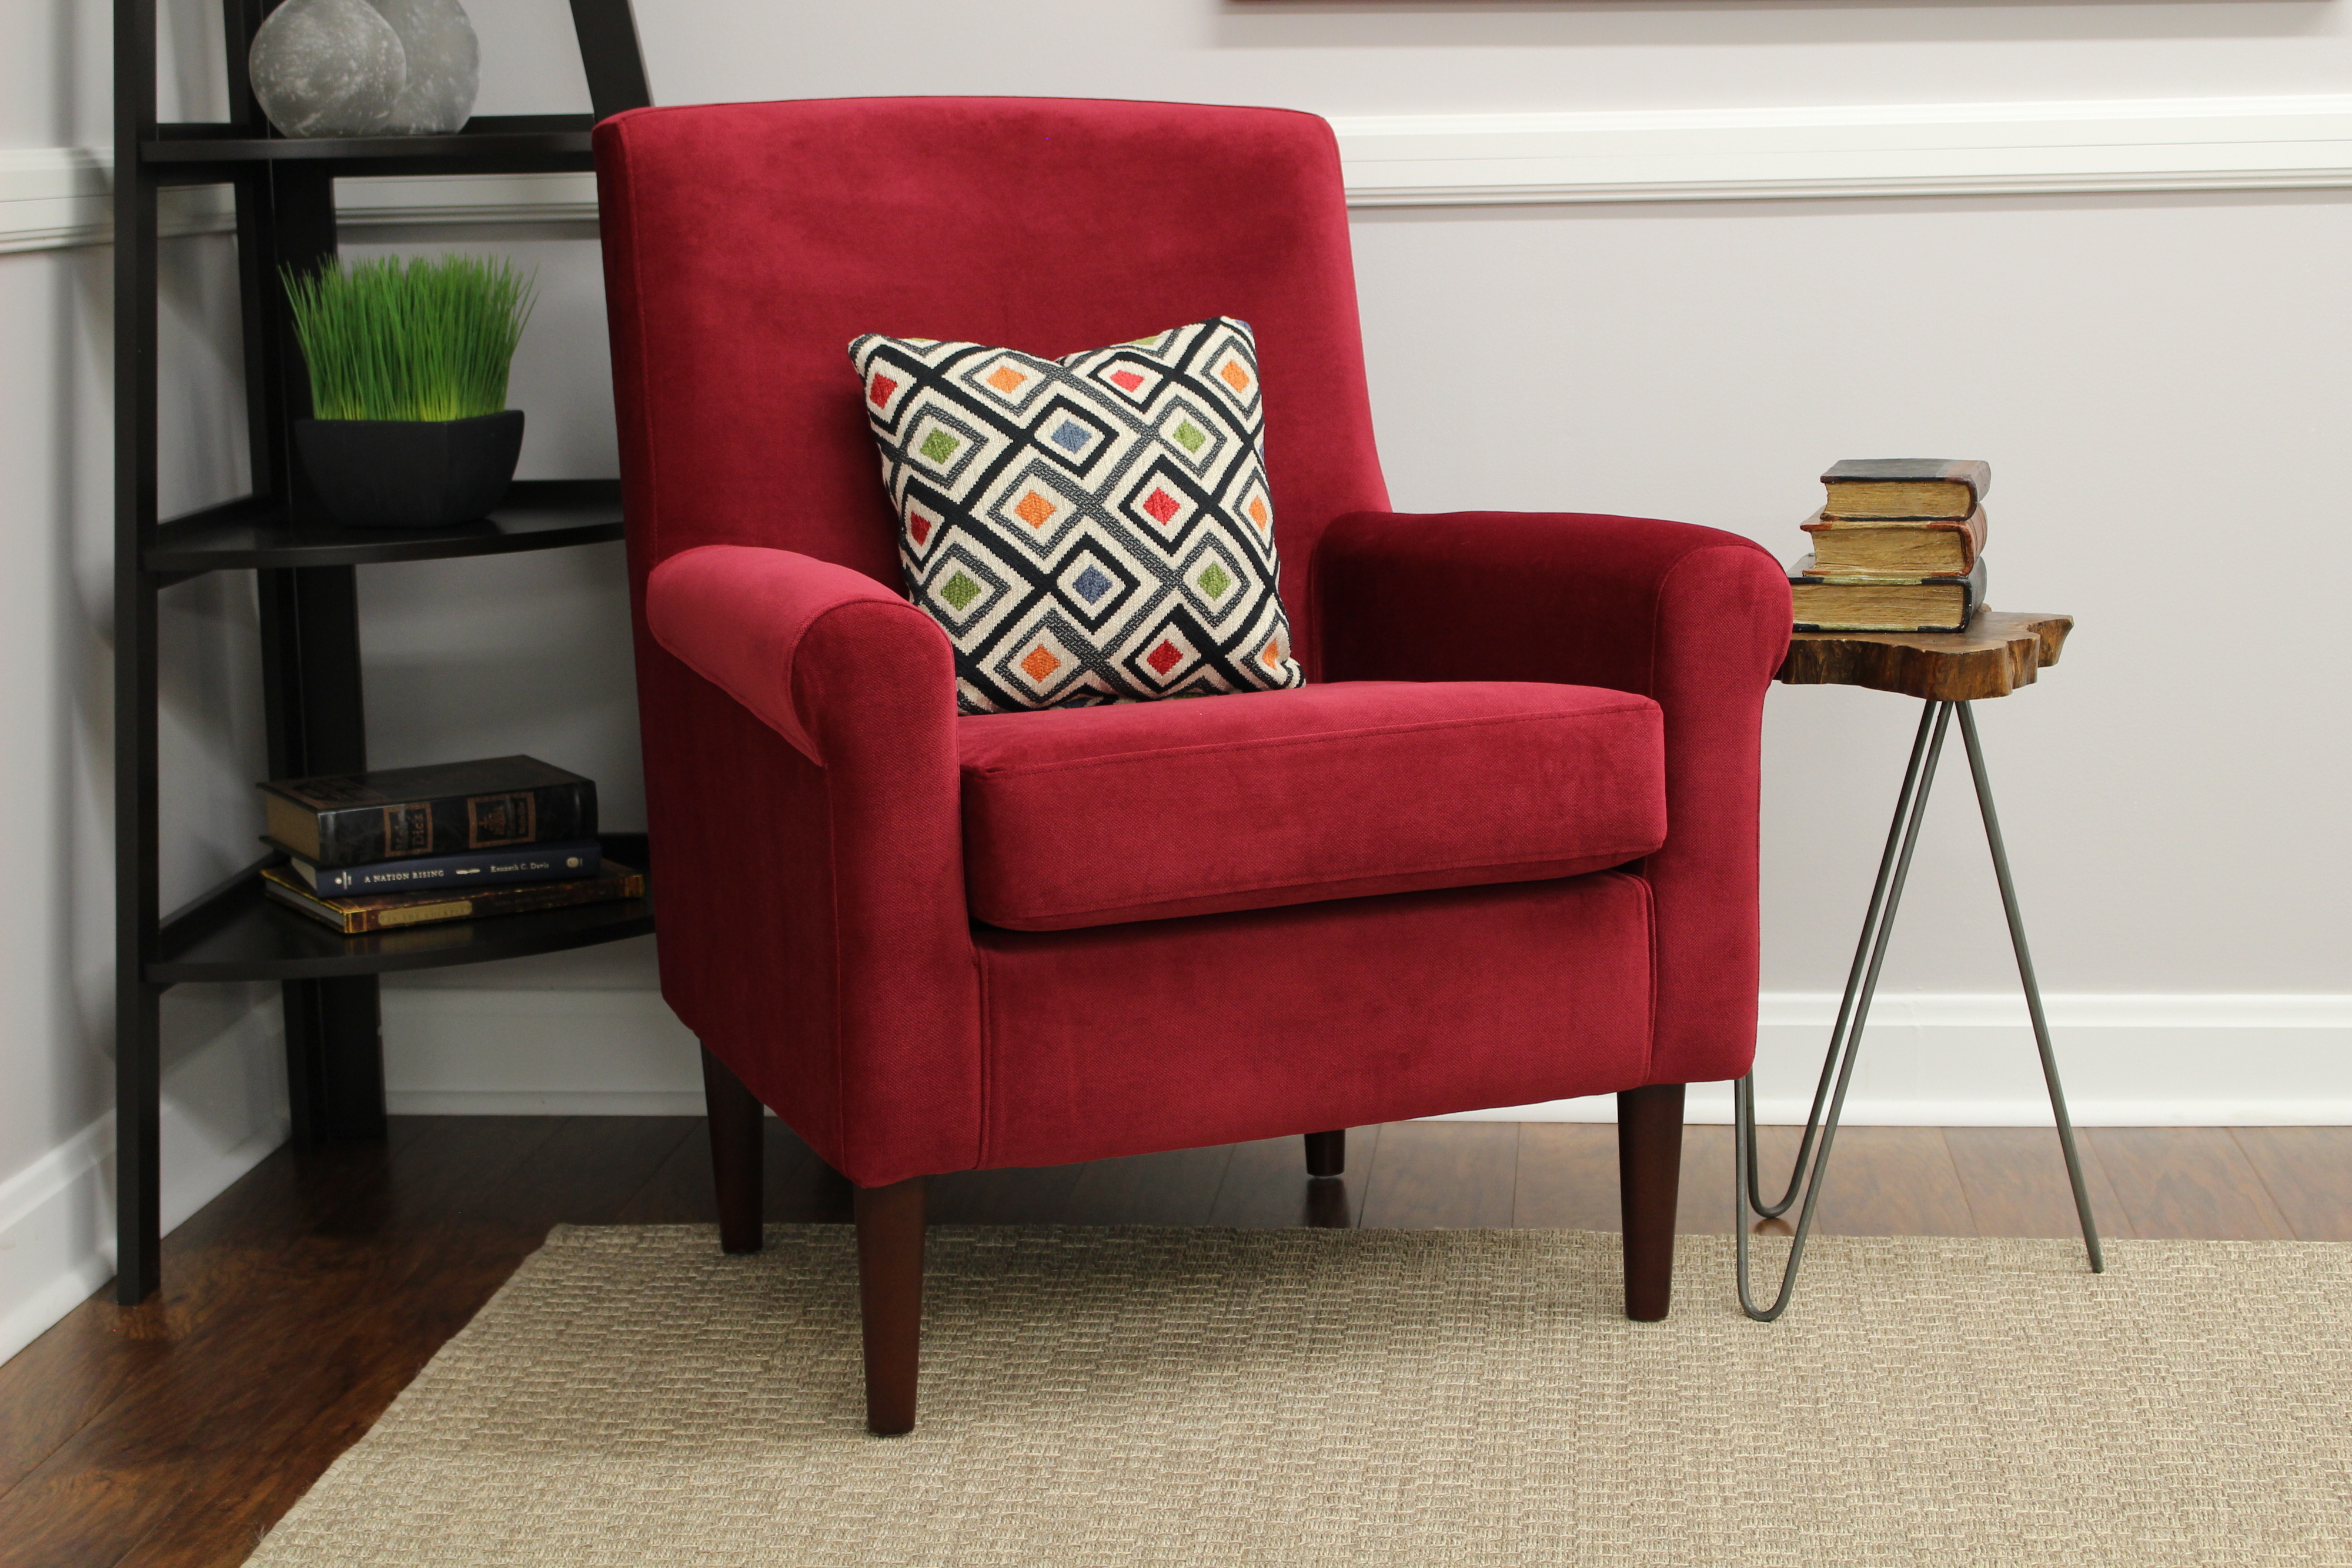 A red accent chair